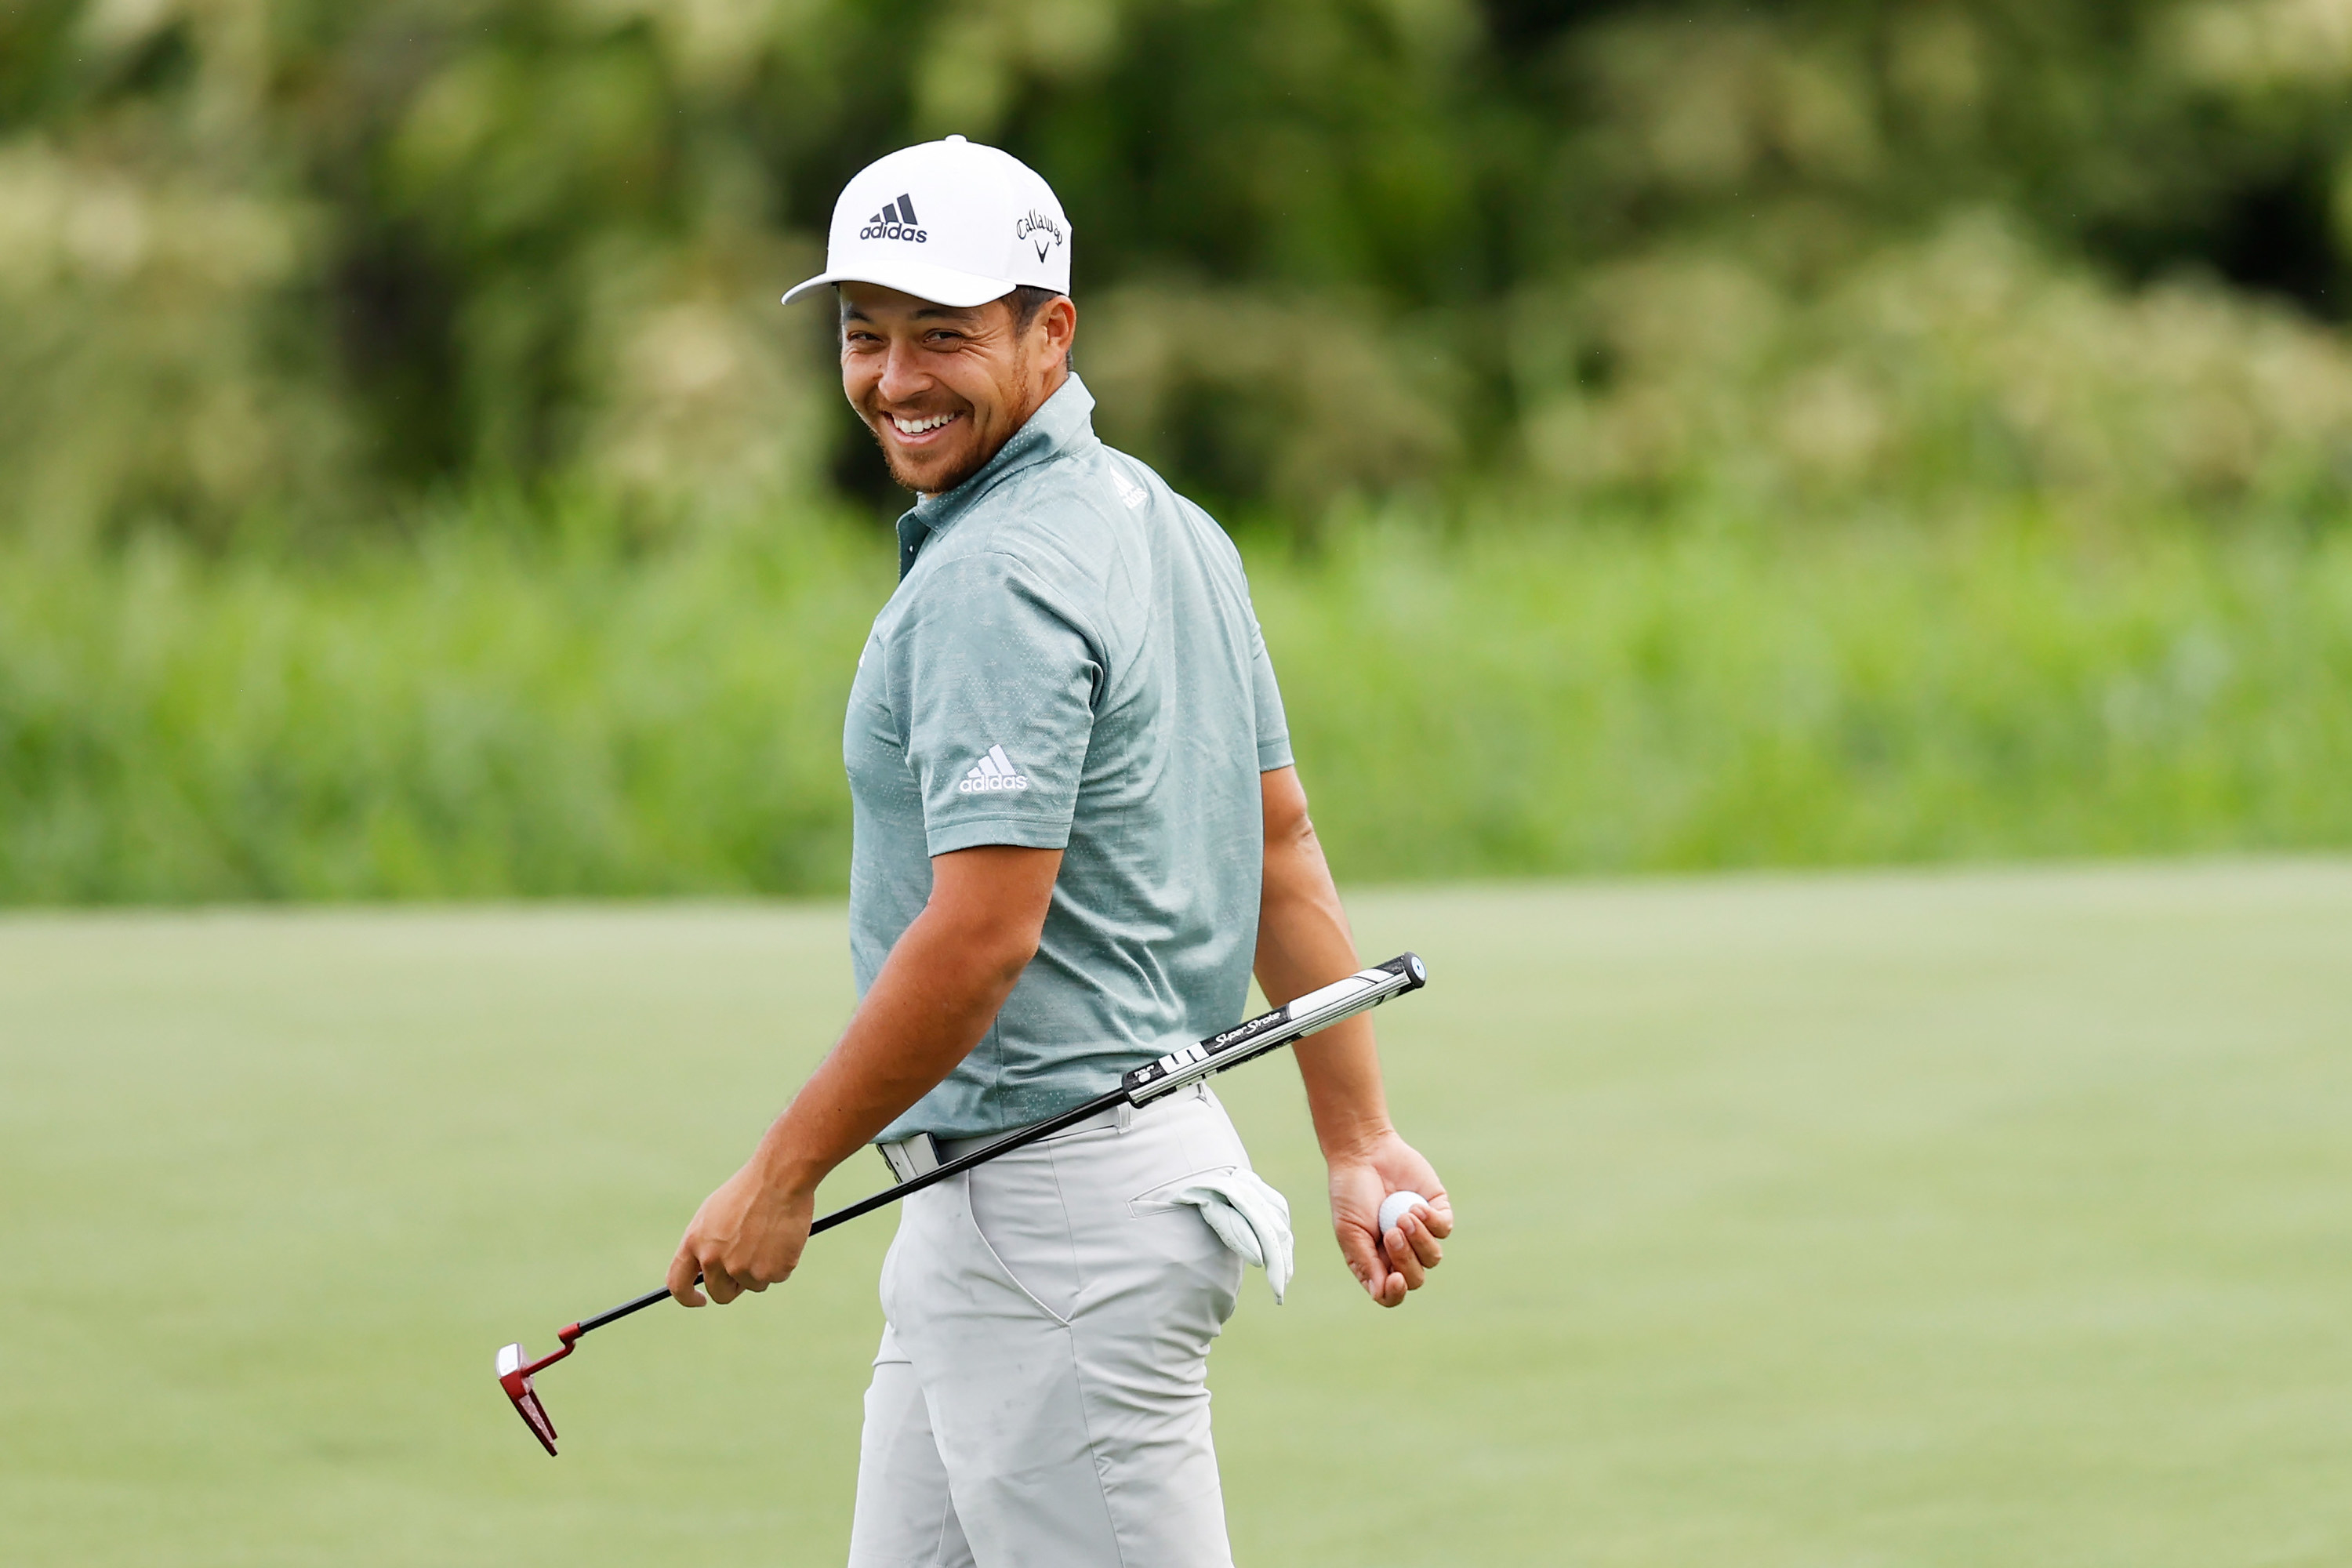 Xander Schauffele smiles while holding his putter